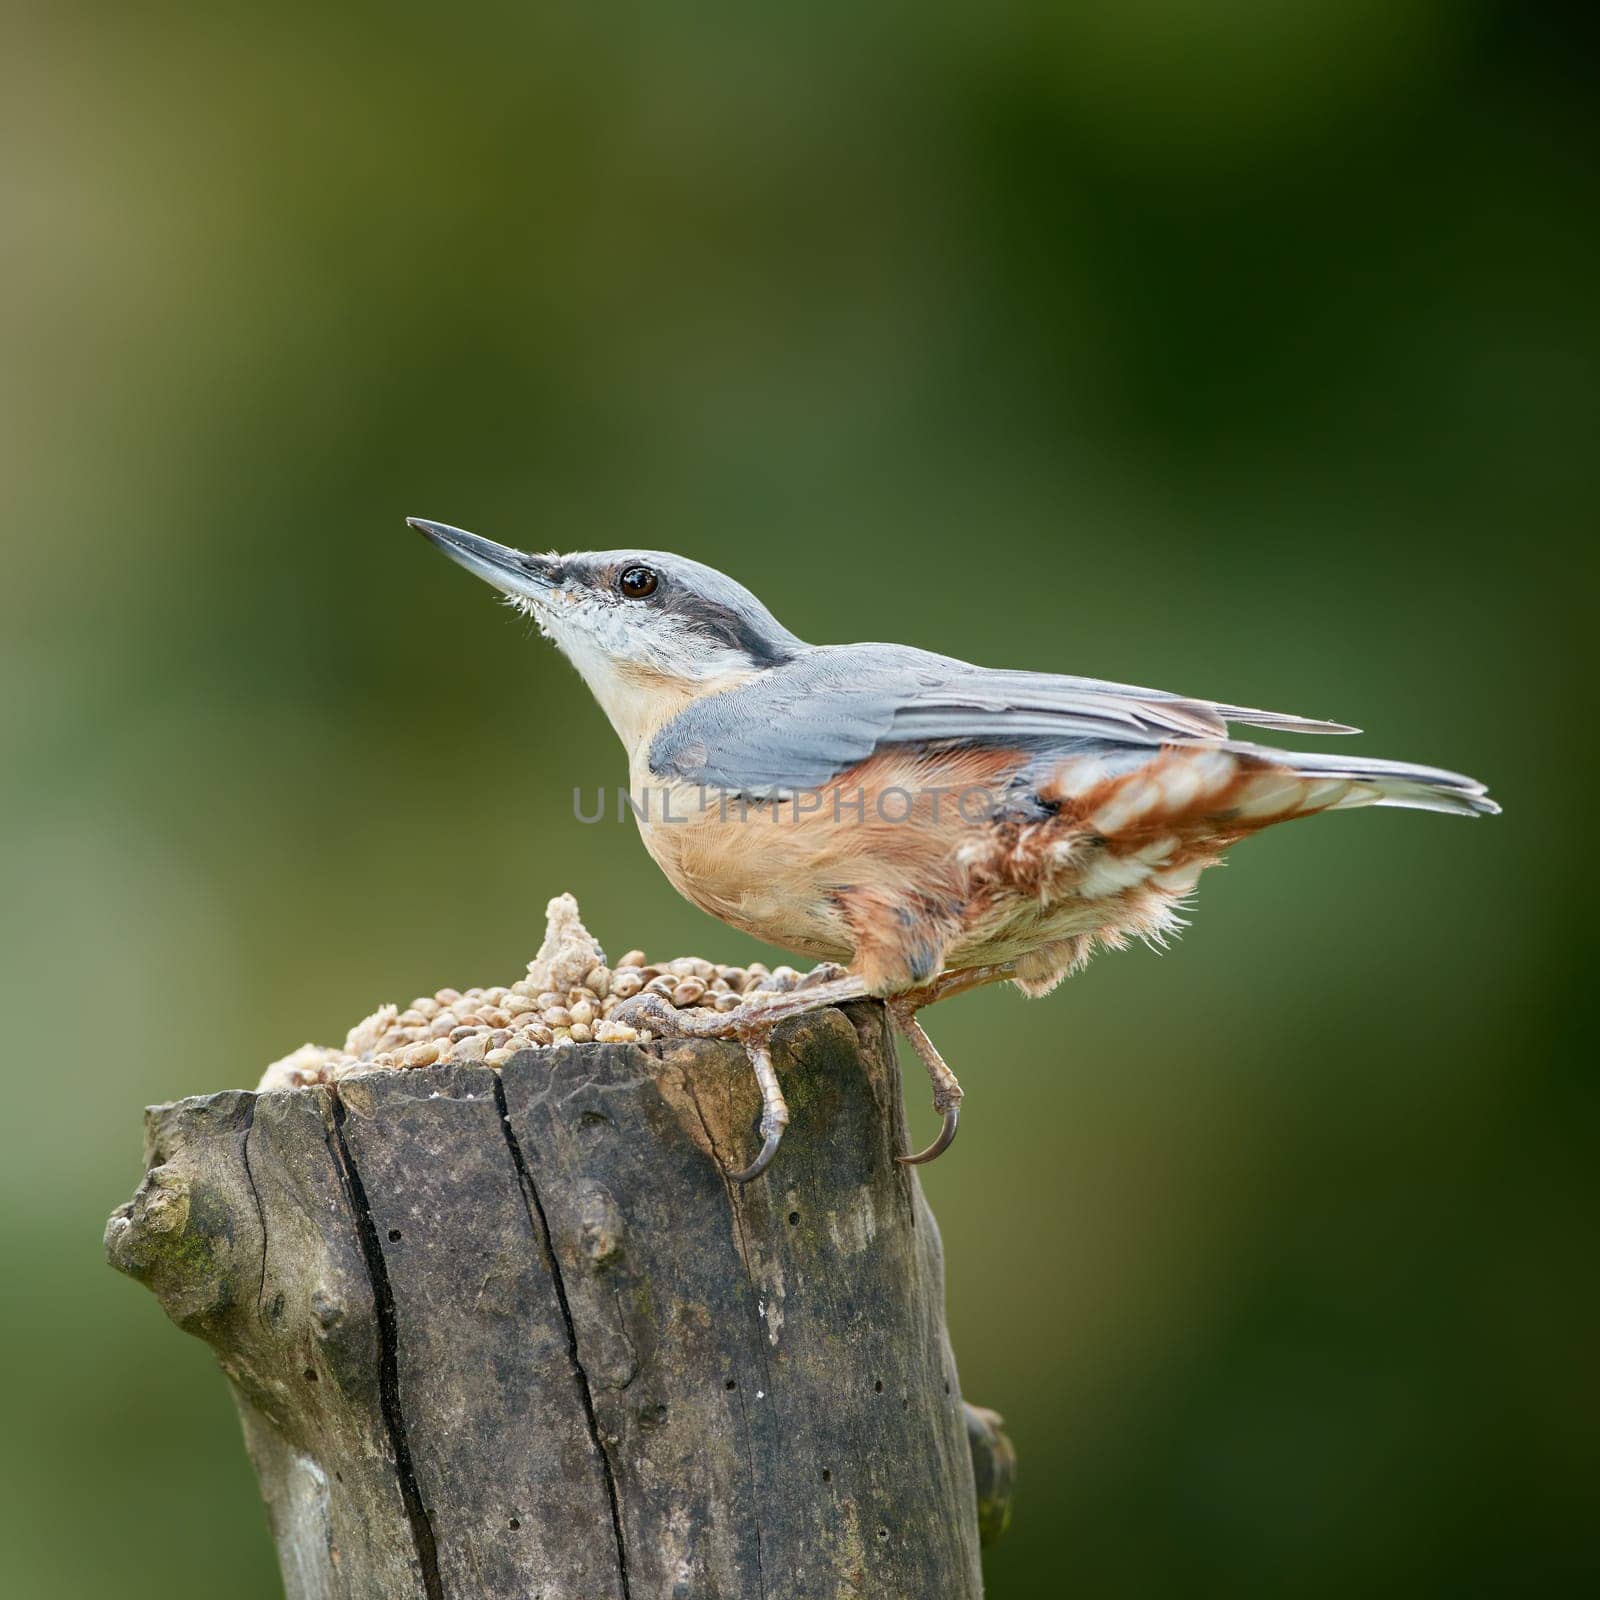 The Nuthatch by YuriArcurs